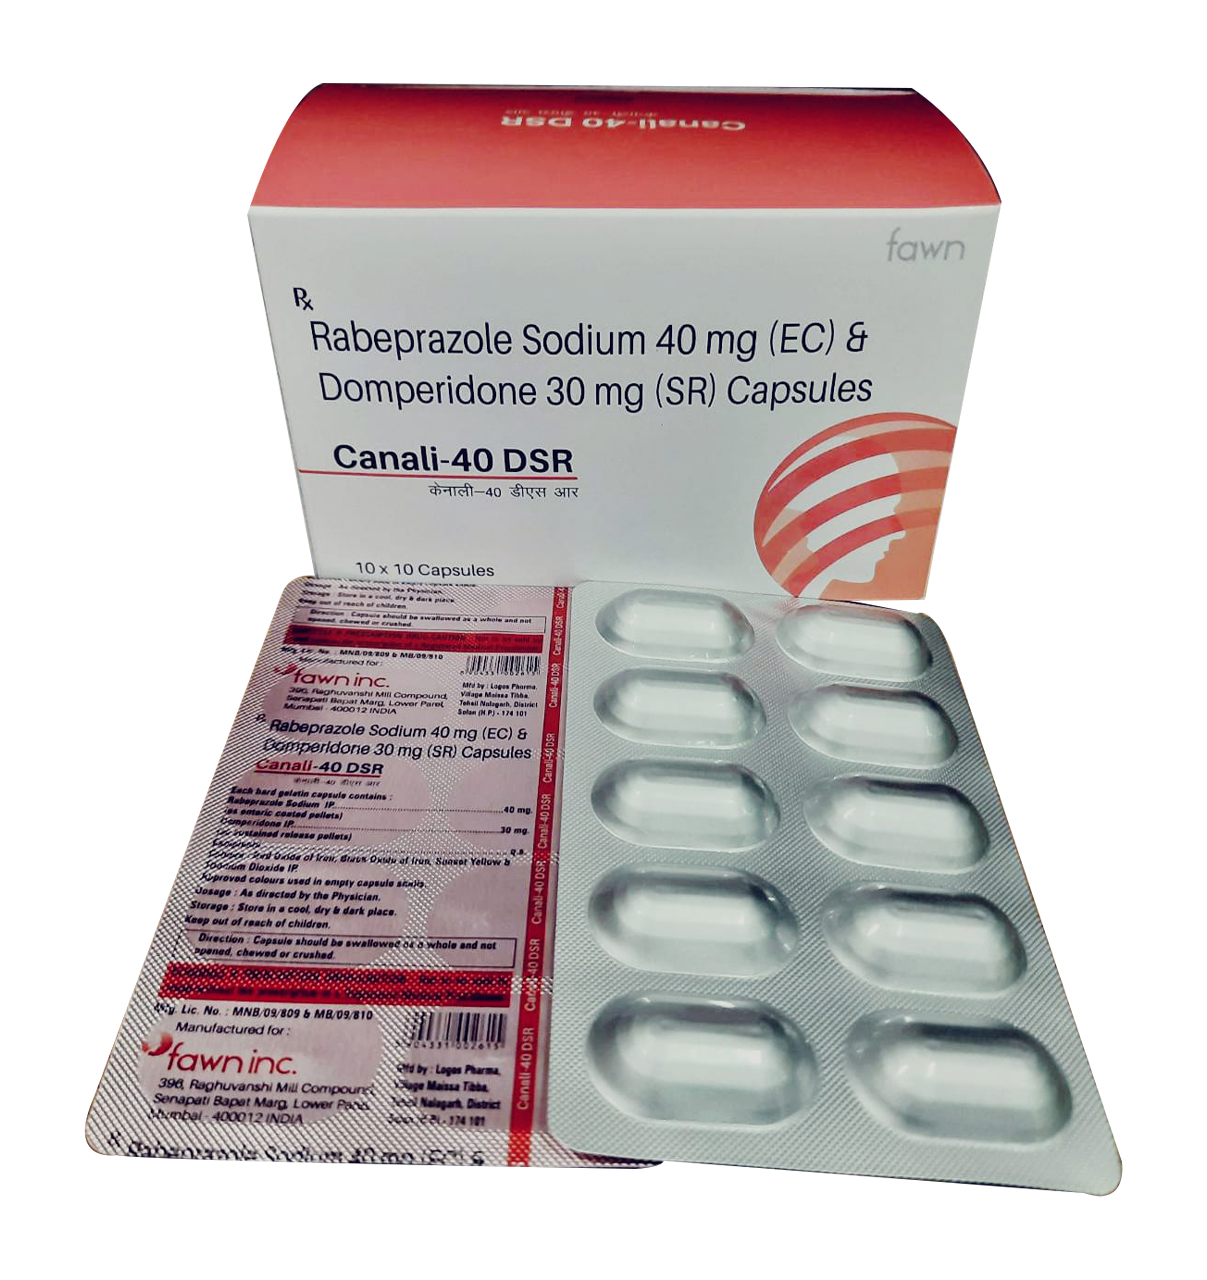 Product Name: CANALI 40 DSR, Compositions of CANALI 40 DSR are Rabeprazole Sodium (EC) 40 mg + Domperidone 30 (SR) 30 mg. - Fawn Incorporation